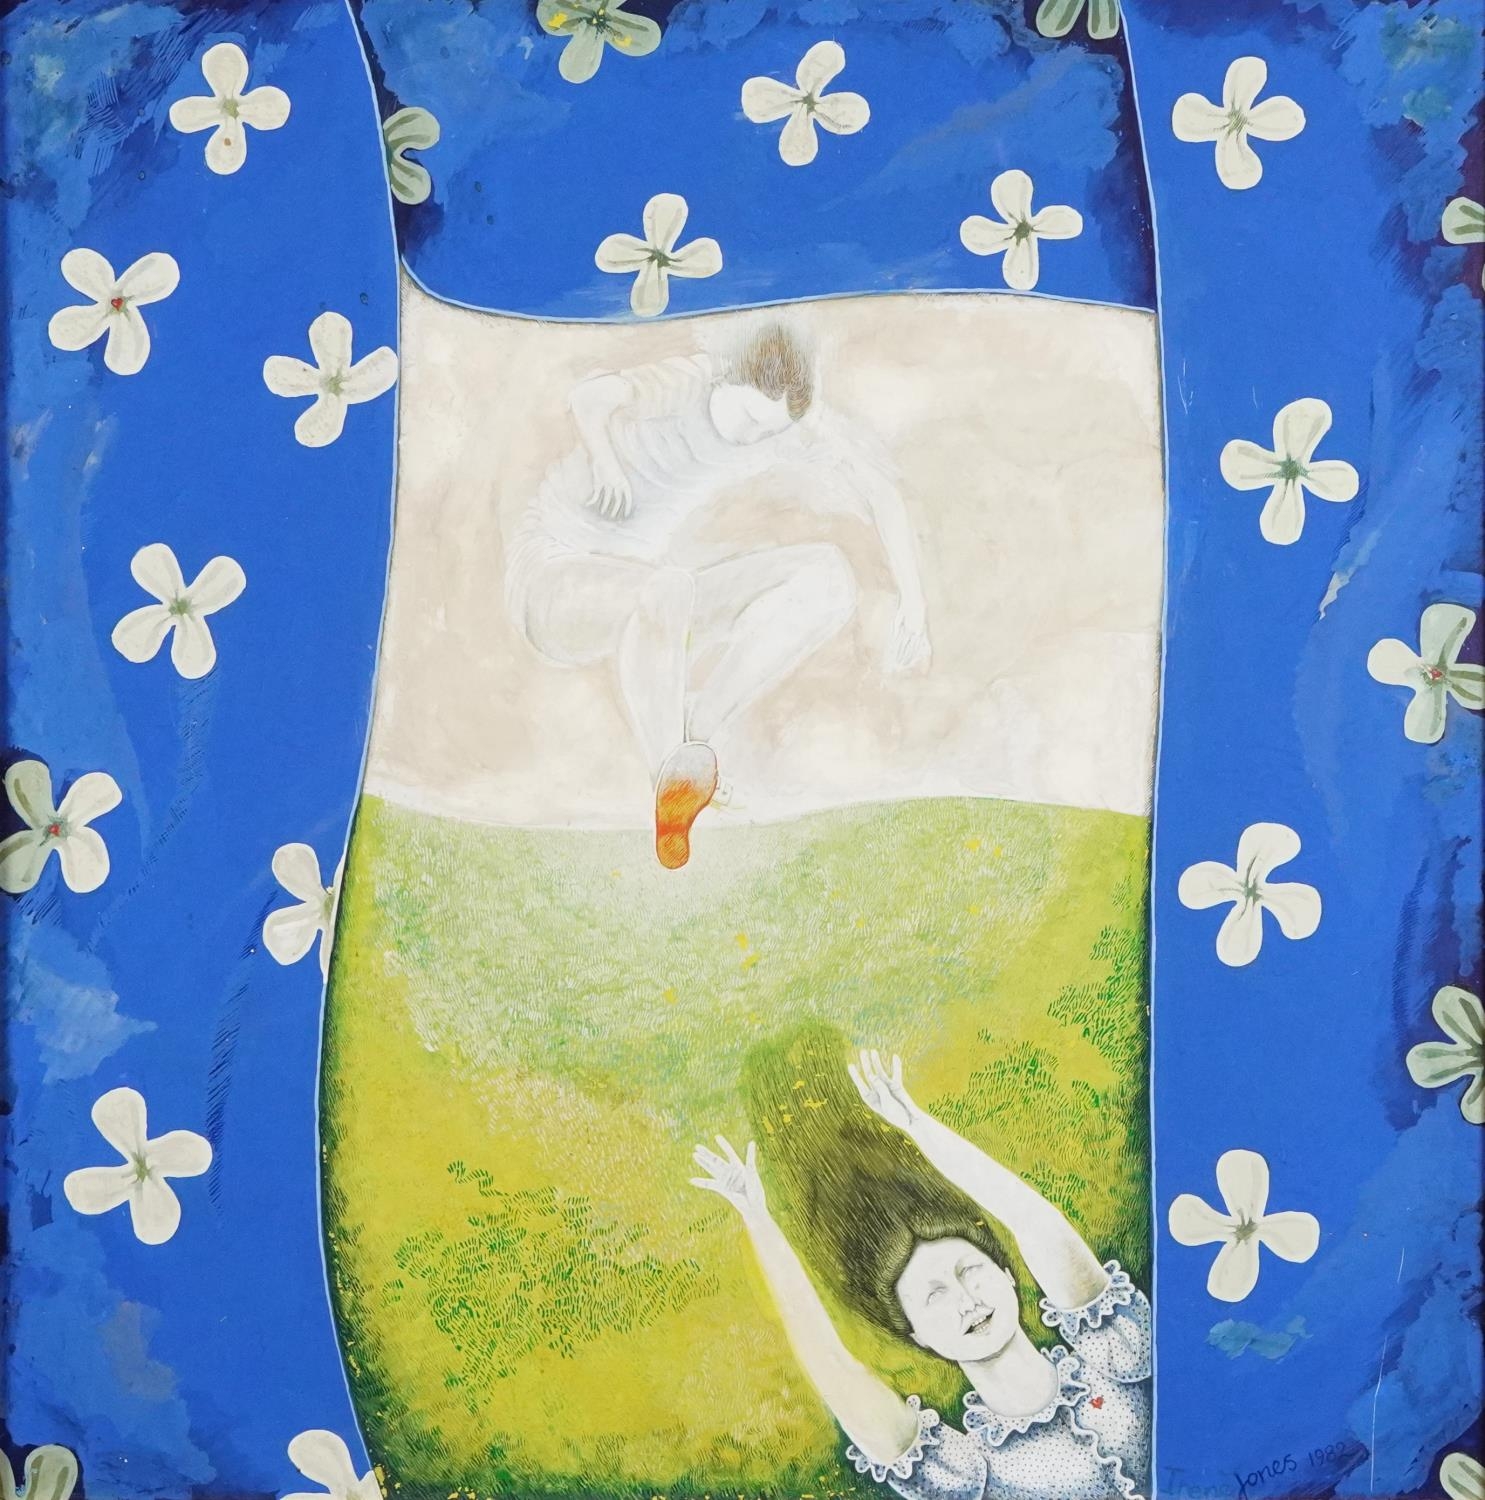 Irene Jones 1982 - Leaping and blue curtains, Cornish school mixed media on board, framed, 60cm x